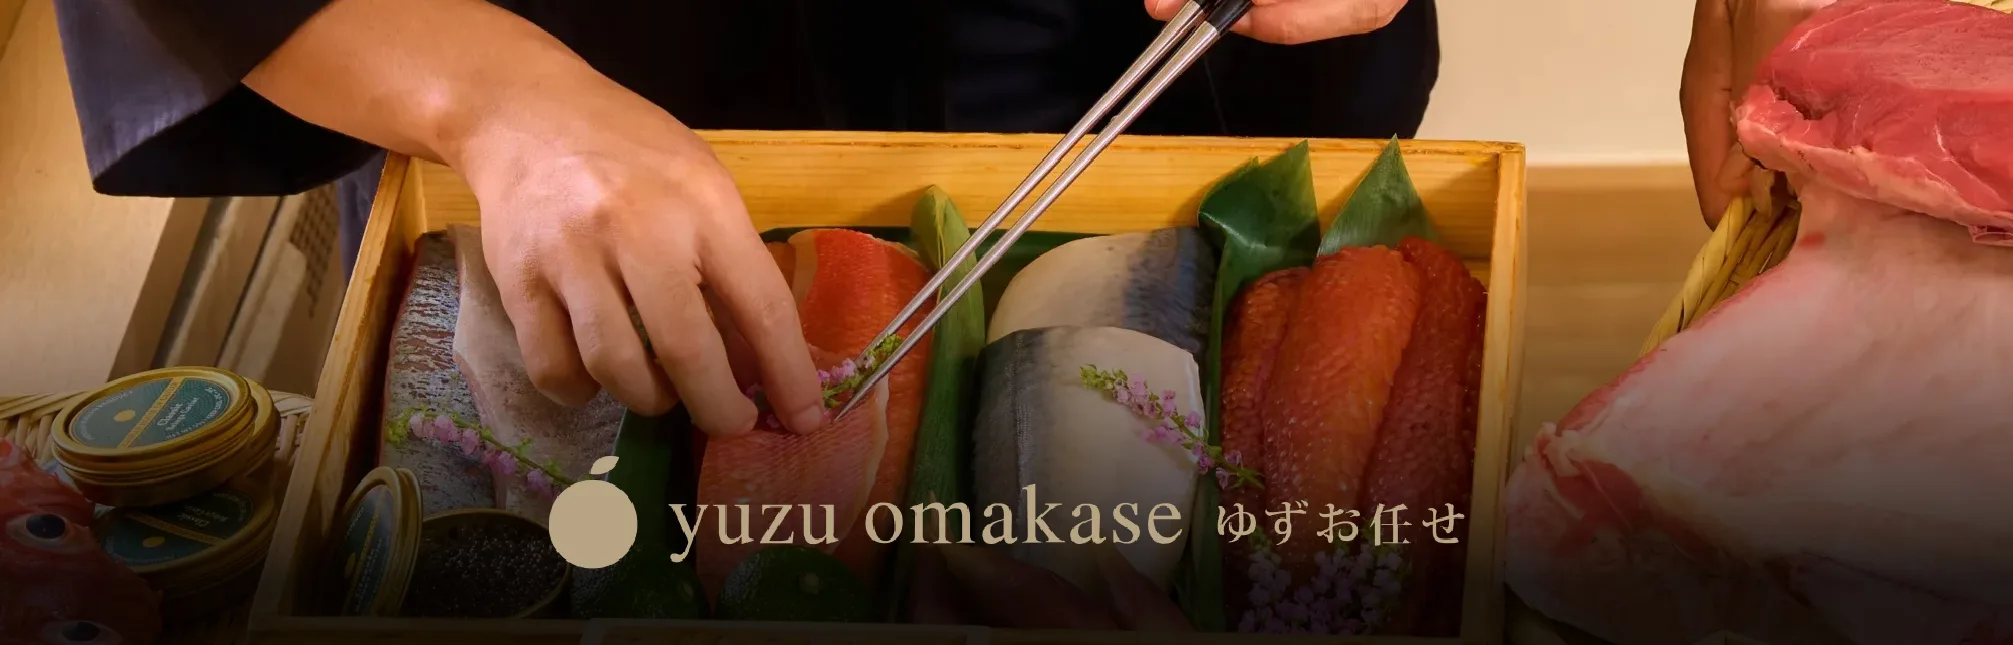 Omakase for Seafood Lovers